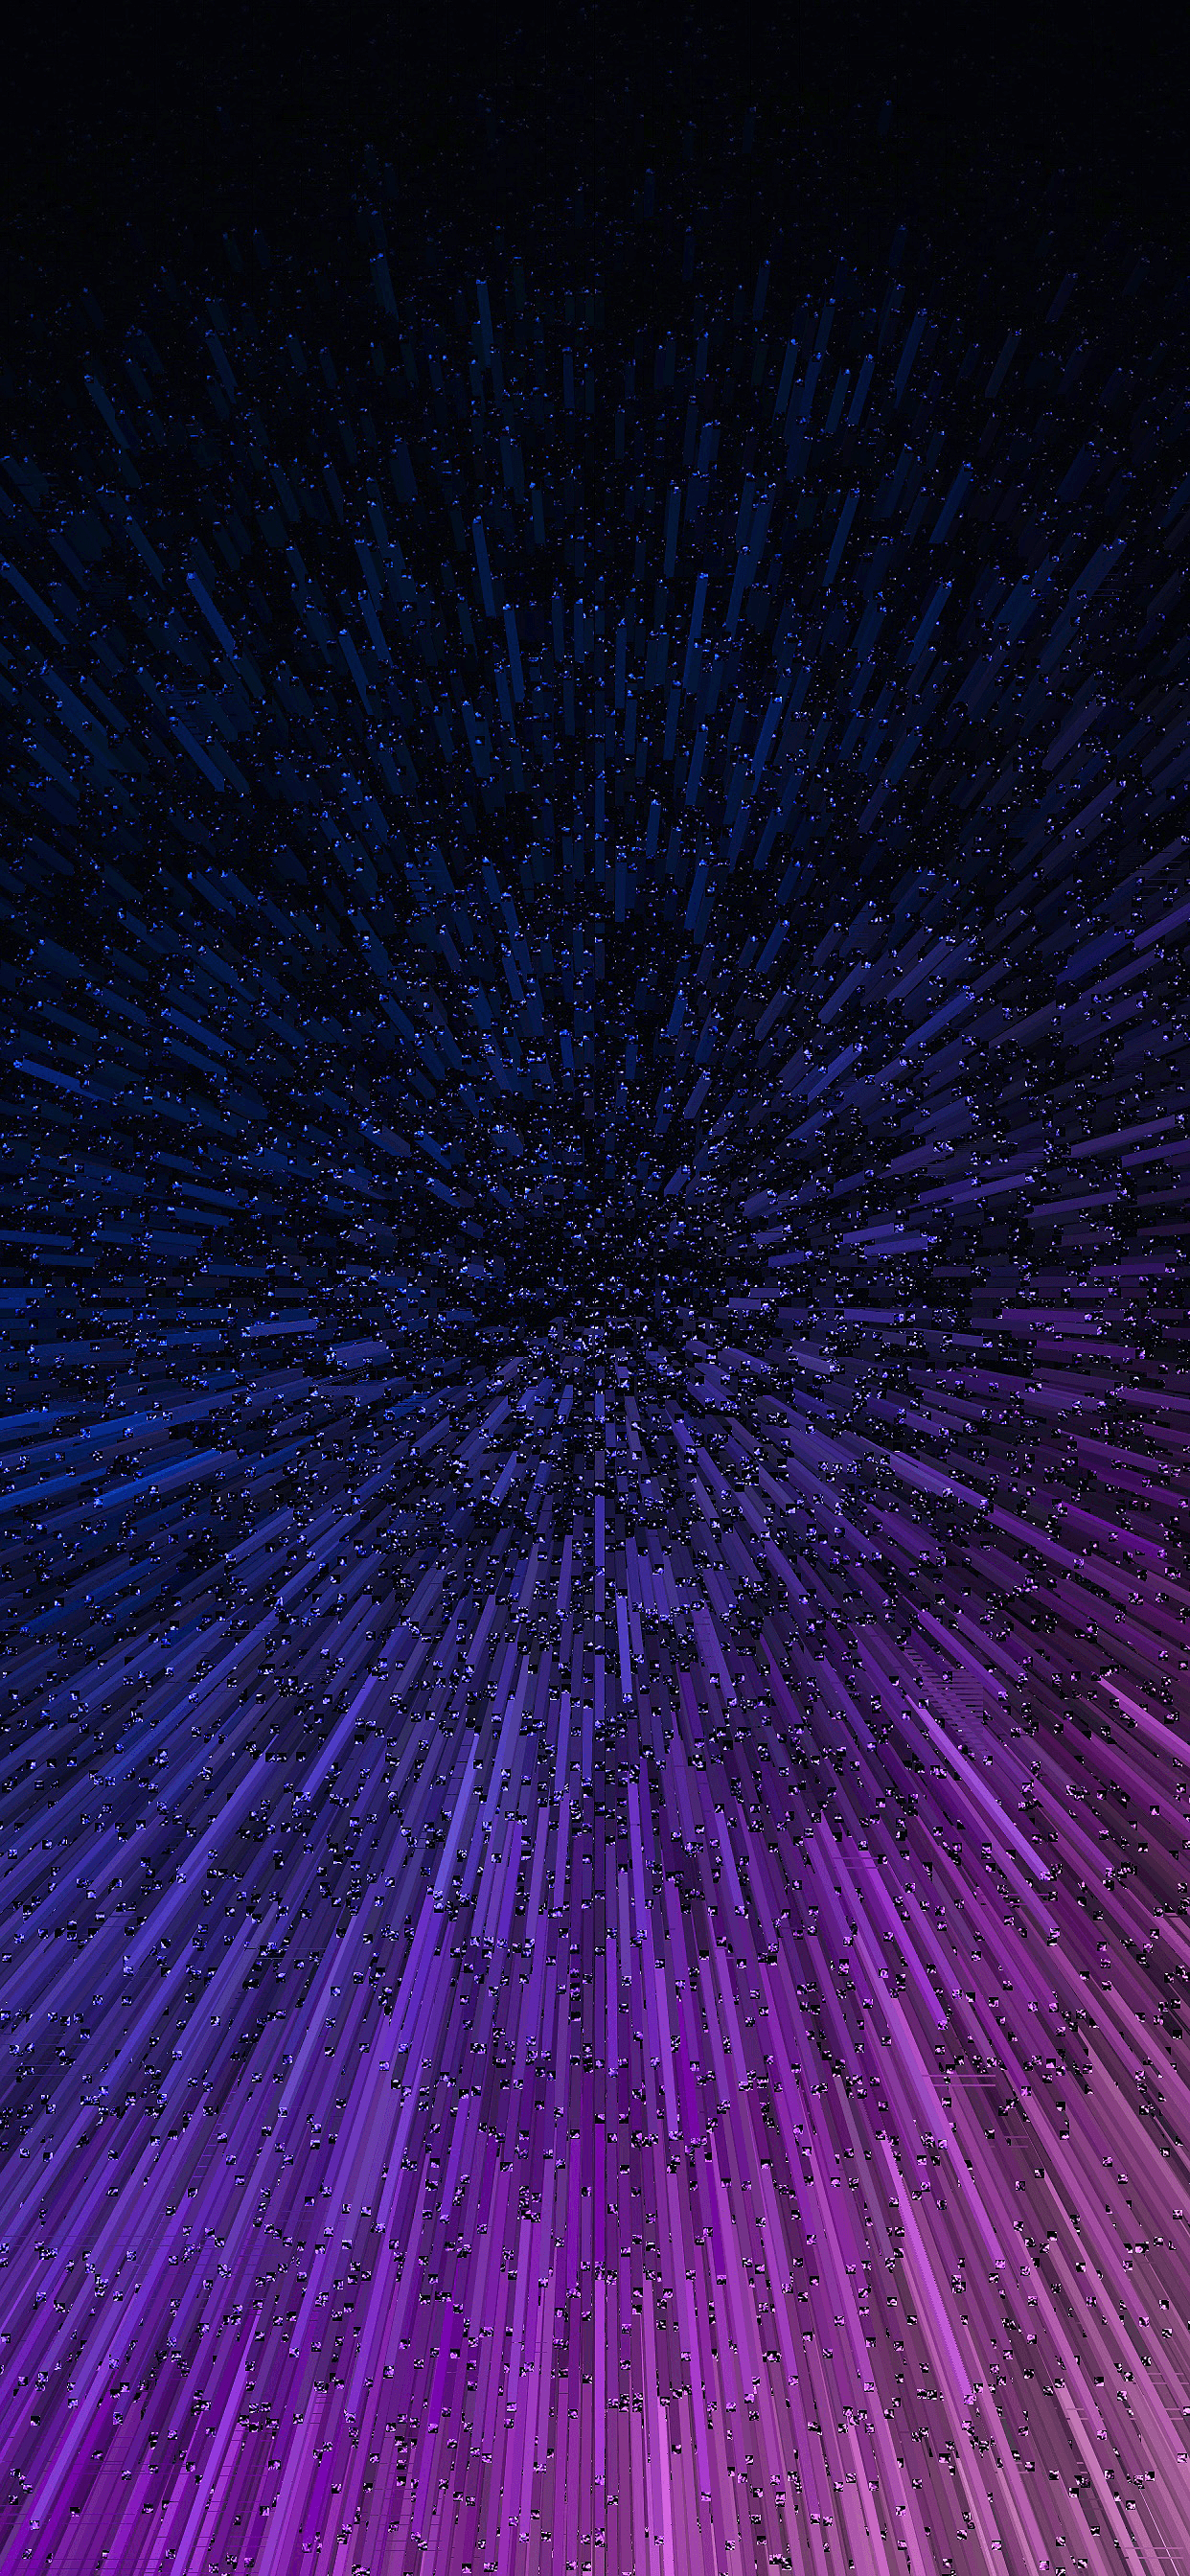 Best iPhone Xs Max Wallpaper: Captivating Wallpaper to Match